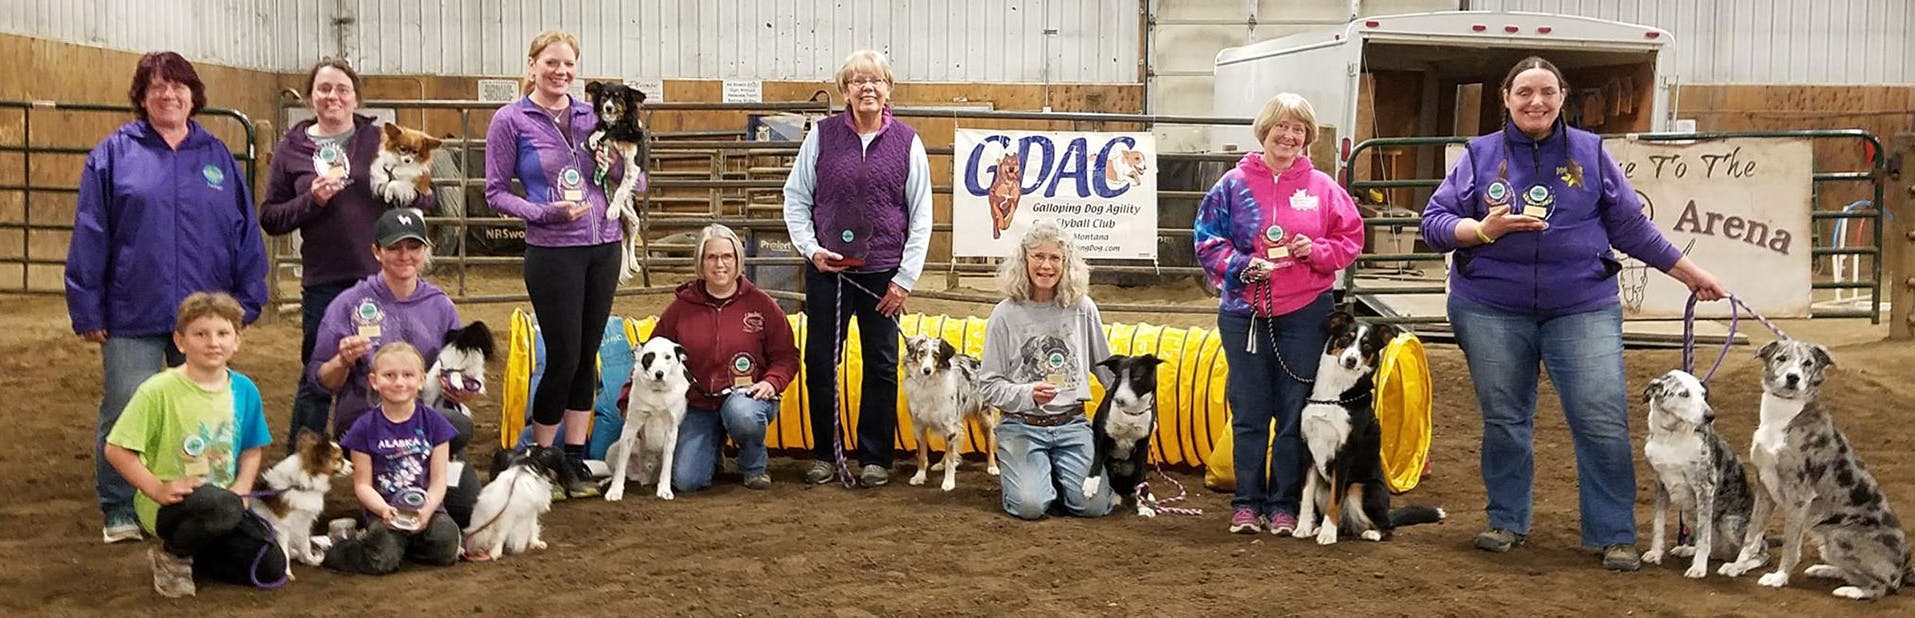 GDAC members with their dogs and awards